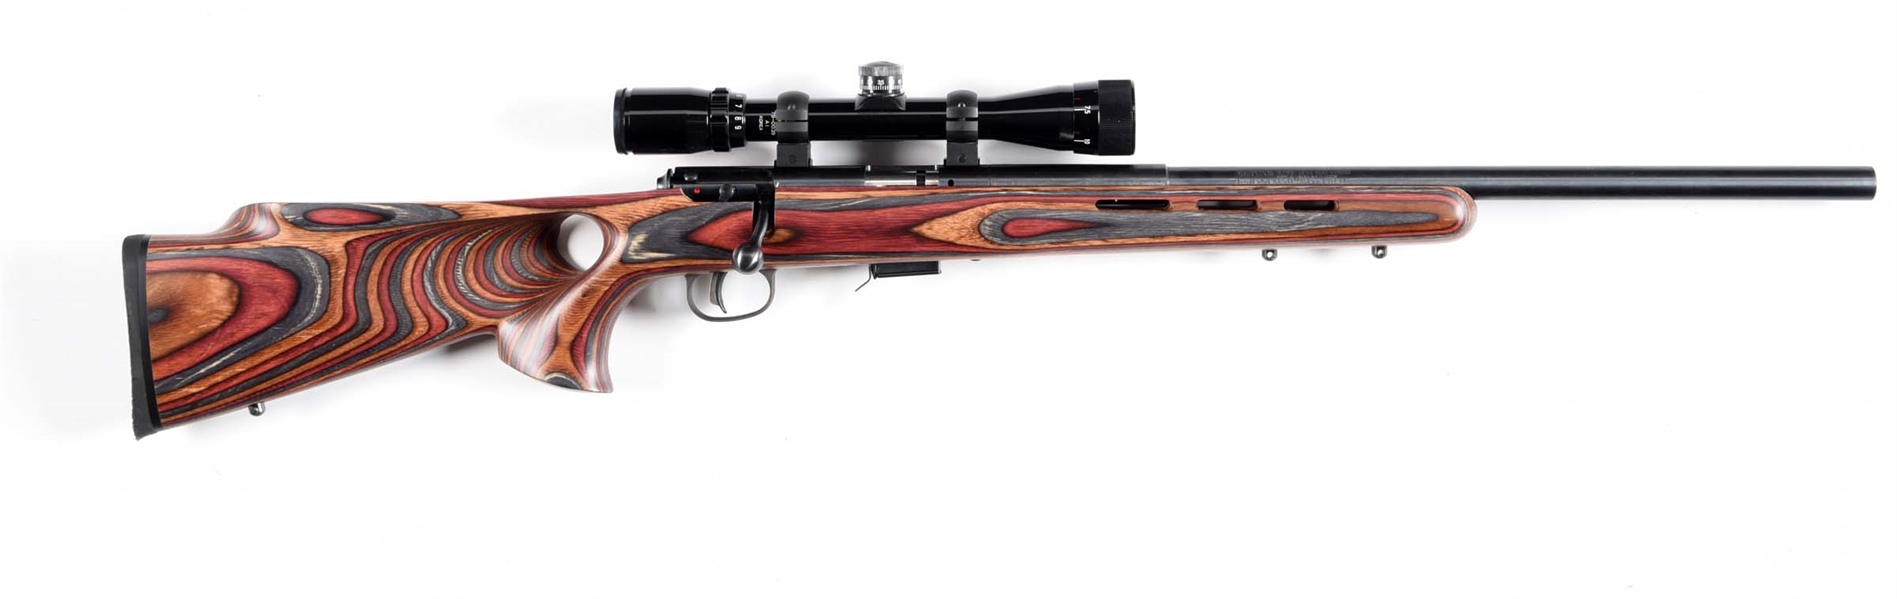 (M) BOXED SAVAGE MODEL 93R17 BOLT ACTION RIFLE.